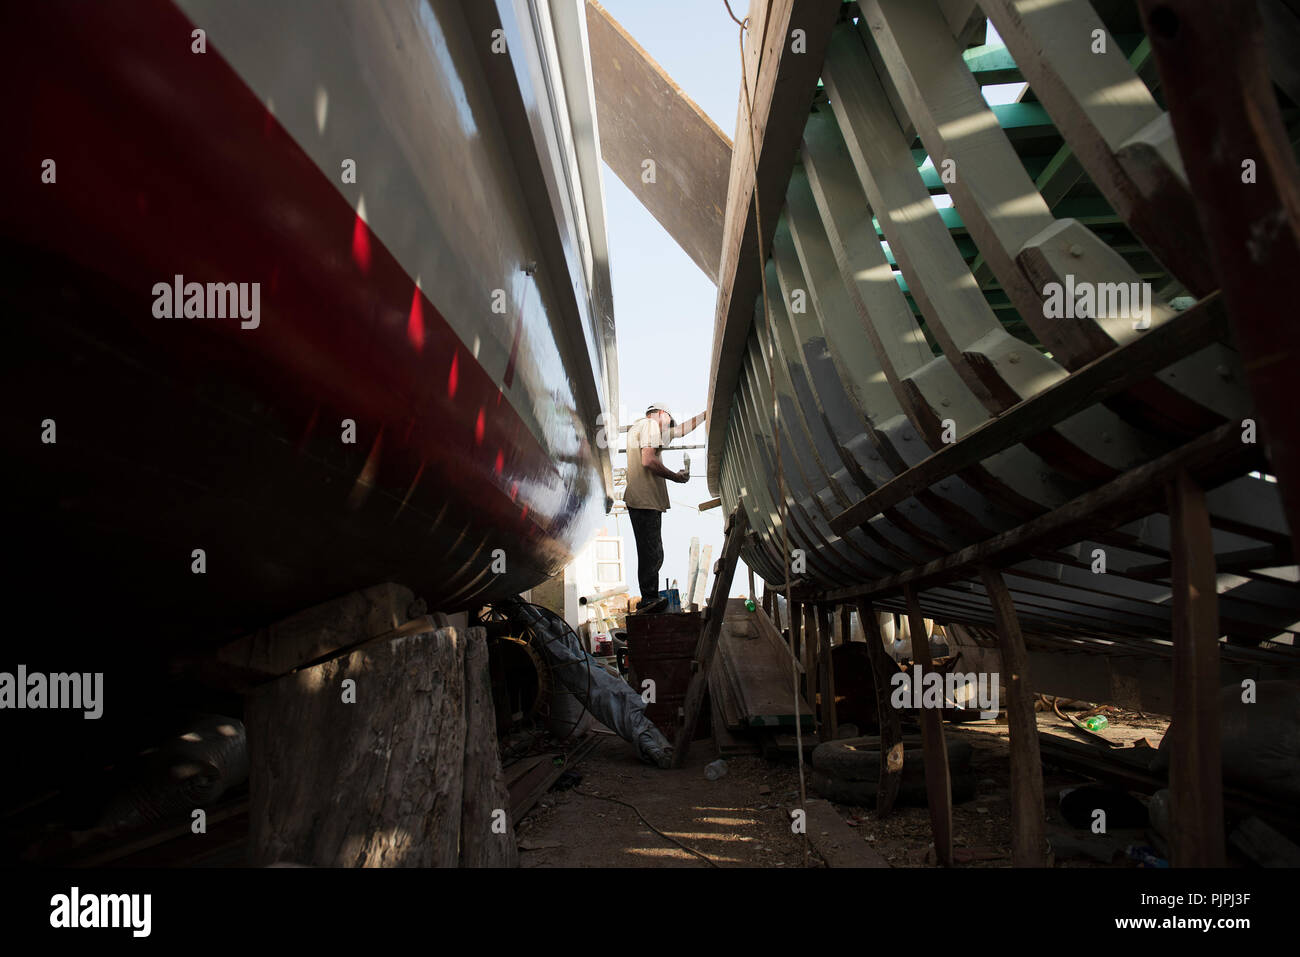 Steps of ship industry Stock Photo